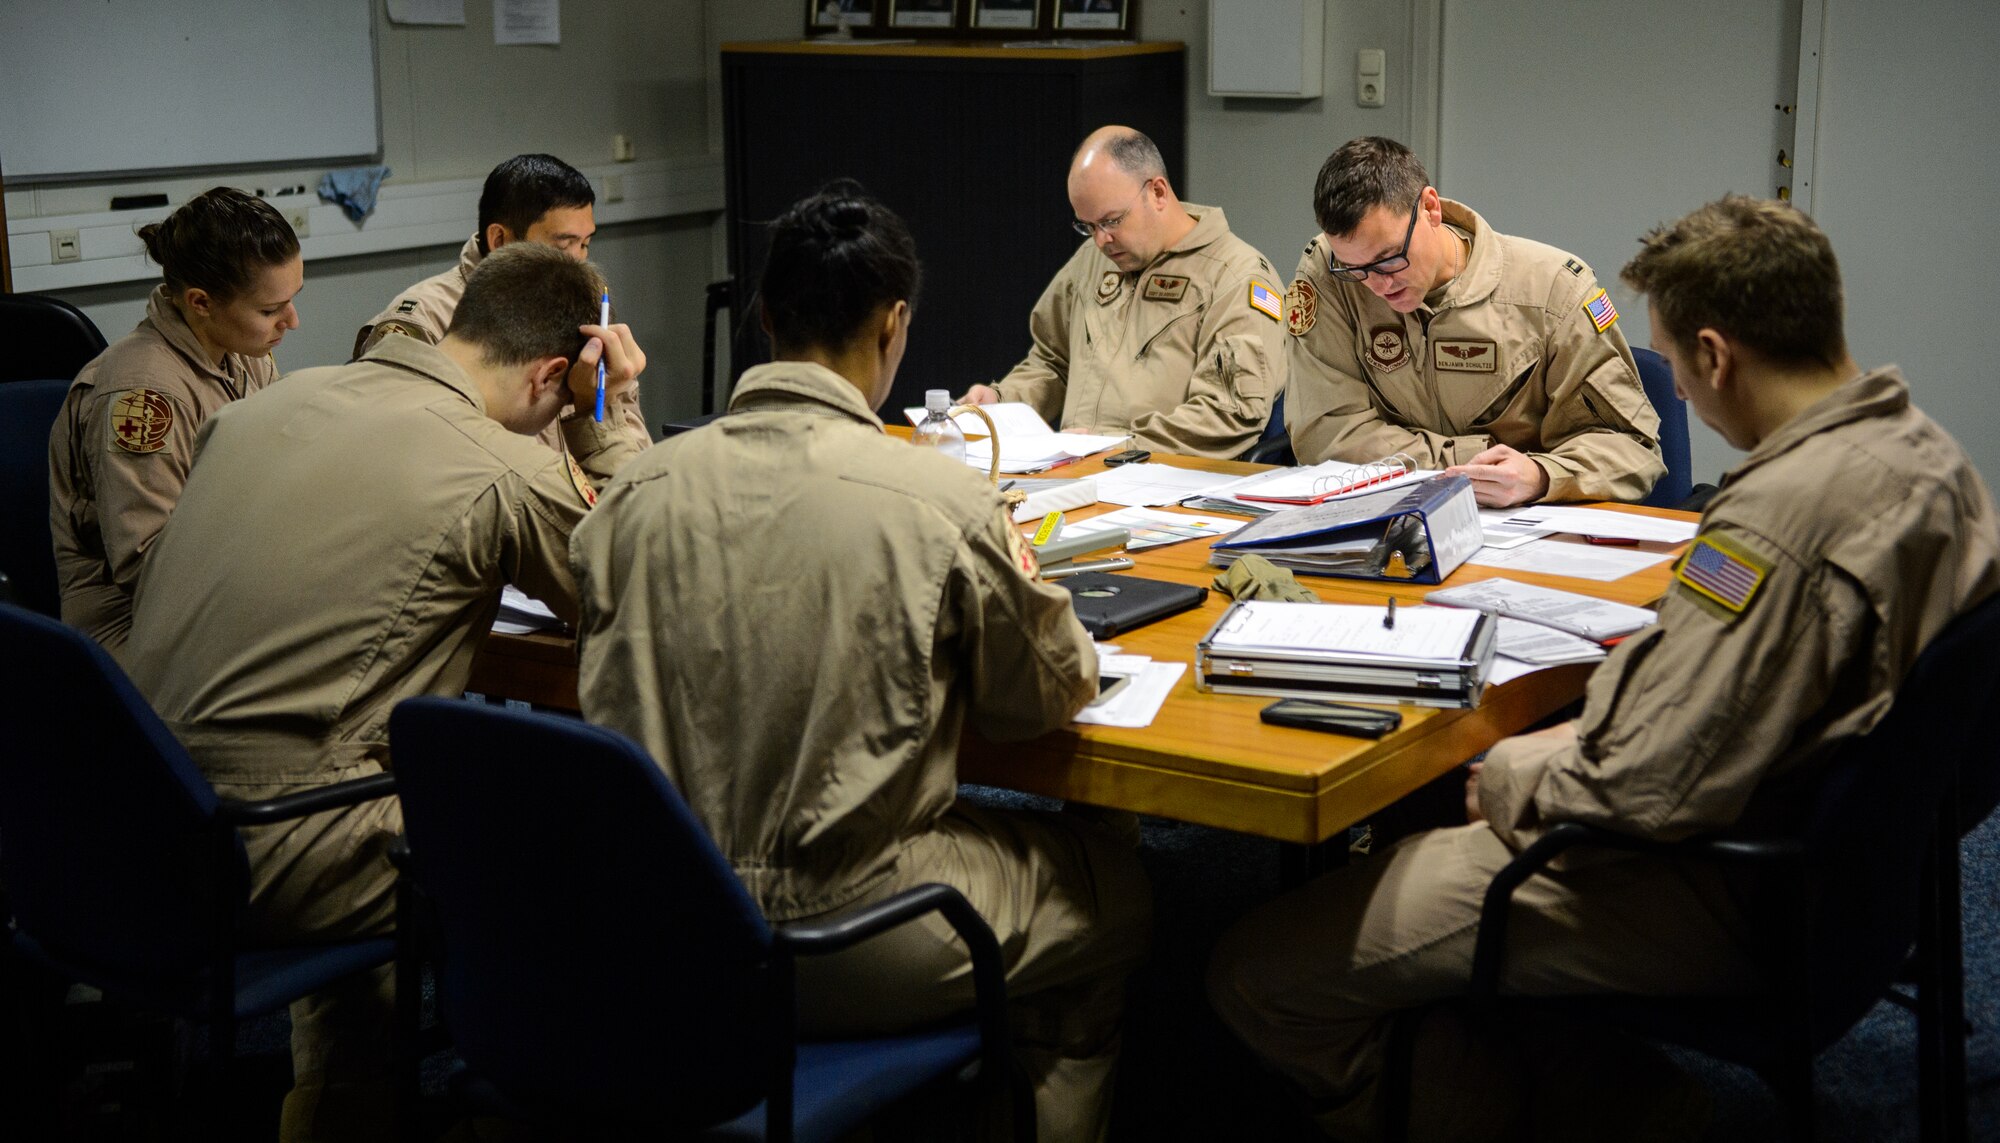 A crew from the 10th Expeditionary Aeromedical Evacuation Flight conducts a pre-mission briefing prior to an evacuation mission Nov. 10, 2015, at Ramstein Air Base, Germany. The crews conduct pre-mission briefings to discuss and understand flight plans, safety operations, necessary supplies, number of patients and their health conditions. (U.S. Air Force photo/Staff Sgt. Armando A. Schwier-Morales)